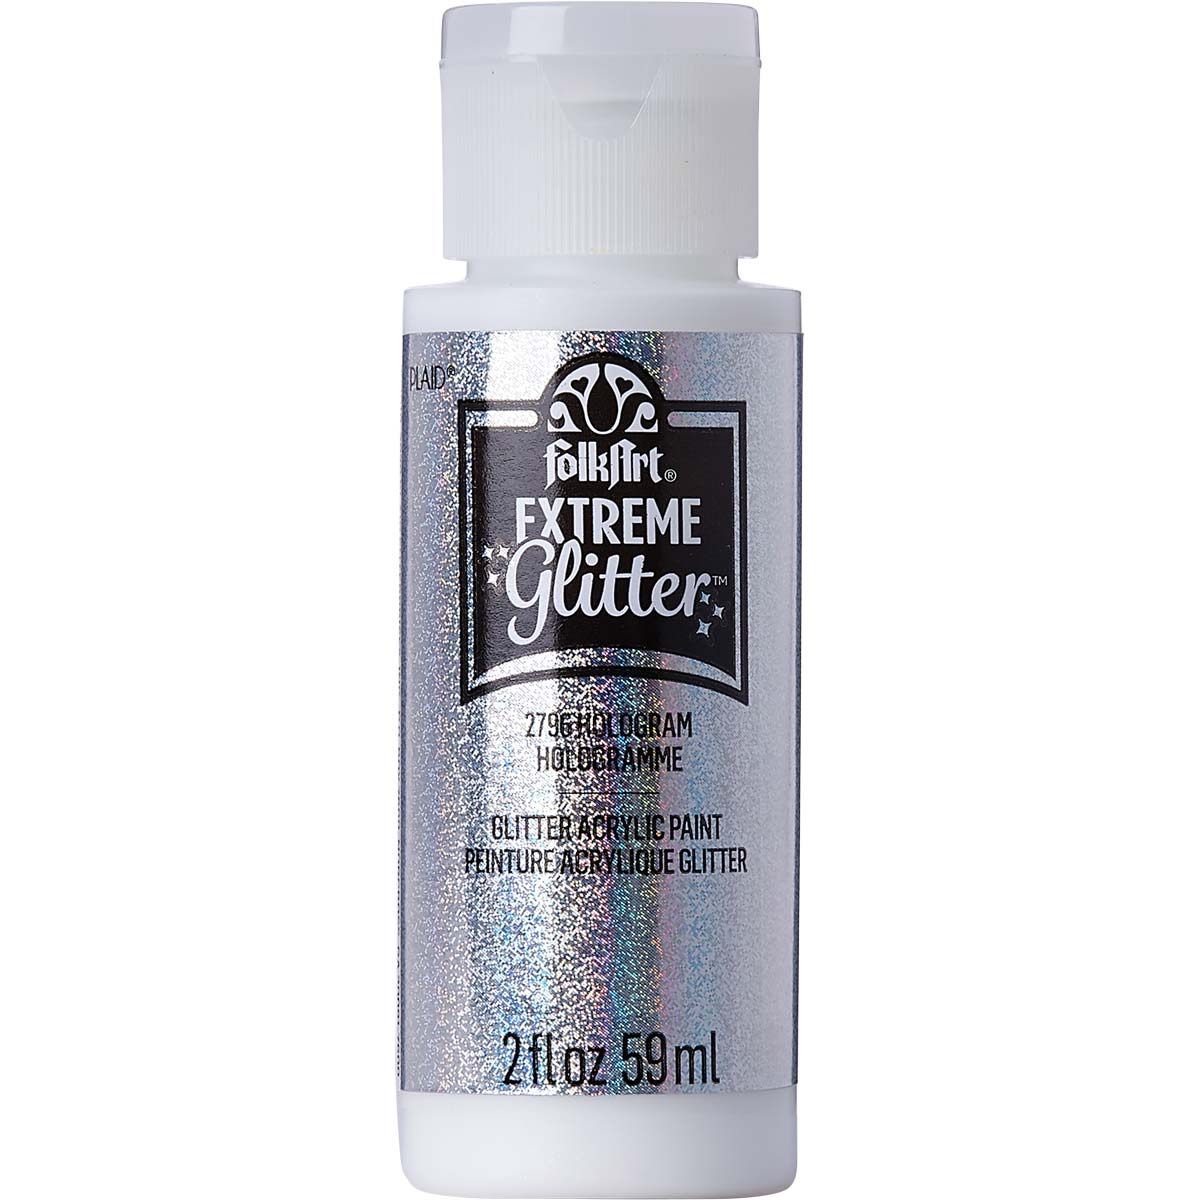 Silver Holographic Glitter Diamond Painting Pen, Dual Ended, DP